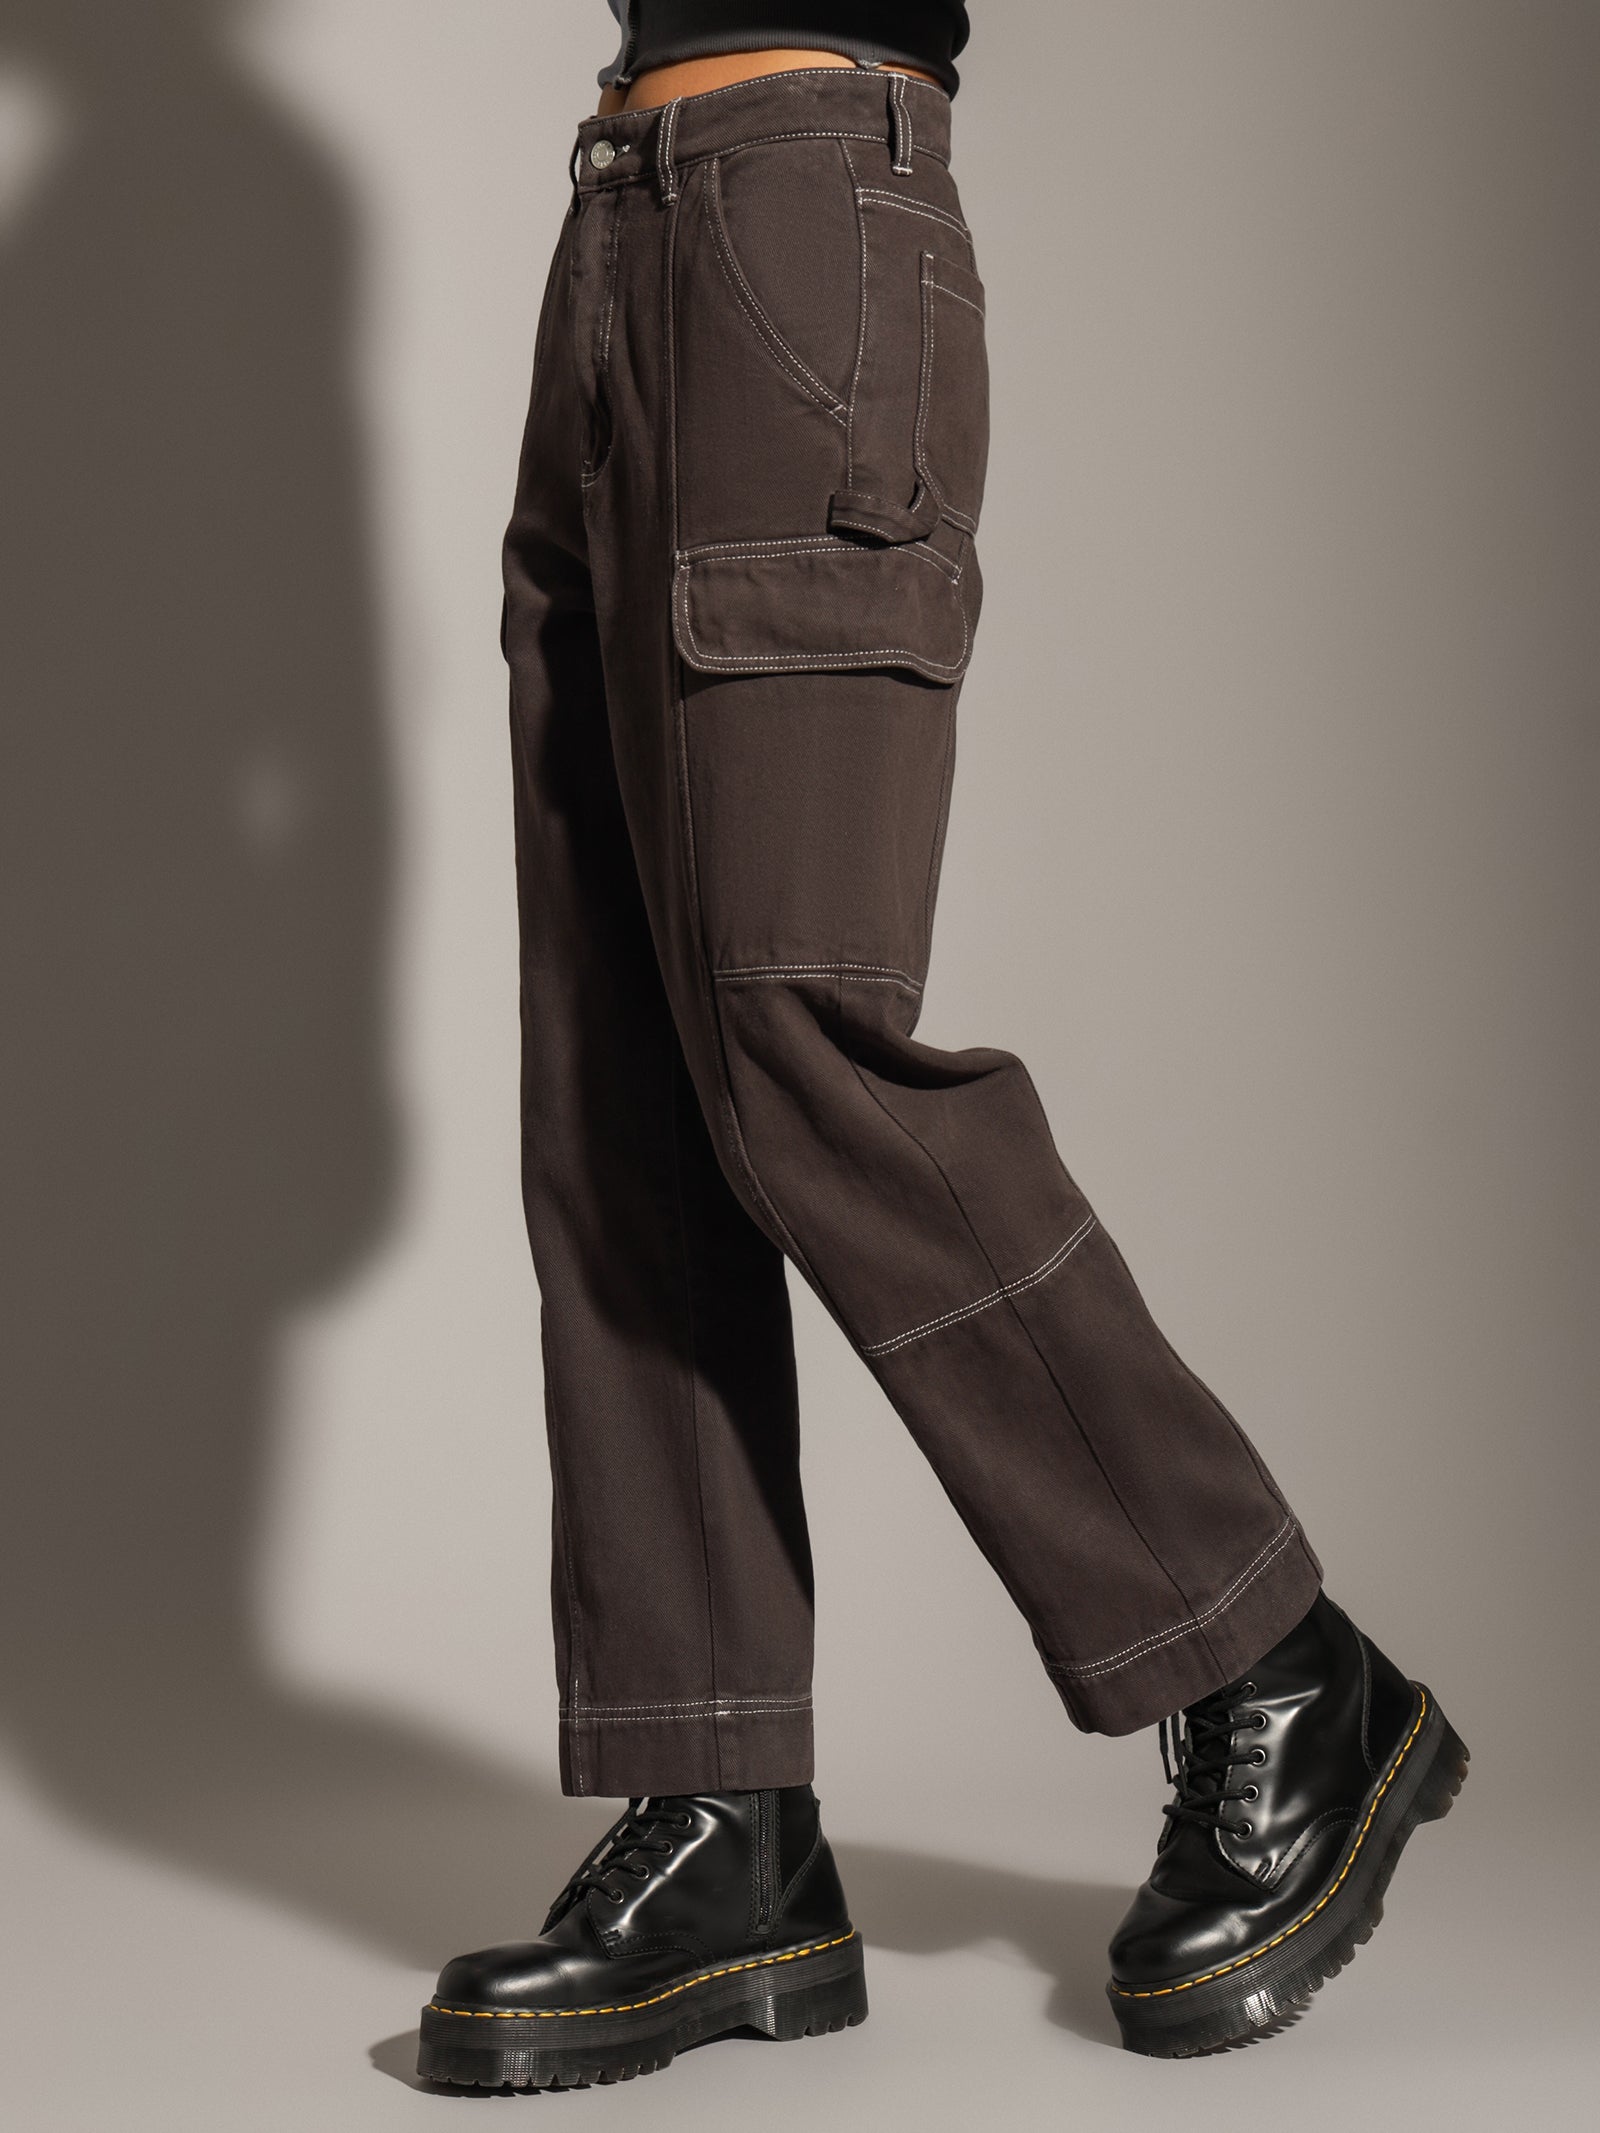 Ivy Cargo Pants in Washed Black - Glue Store